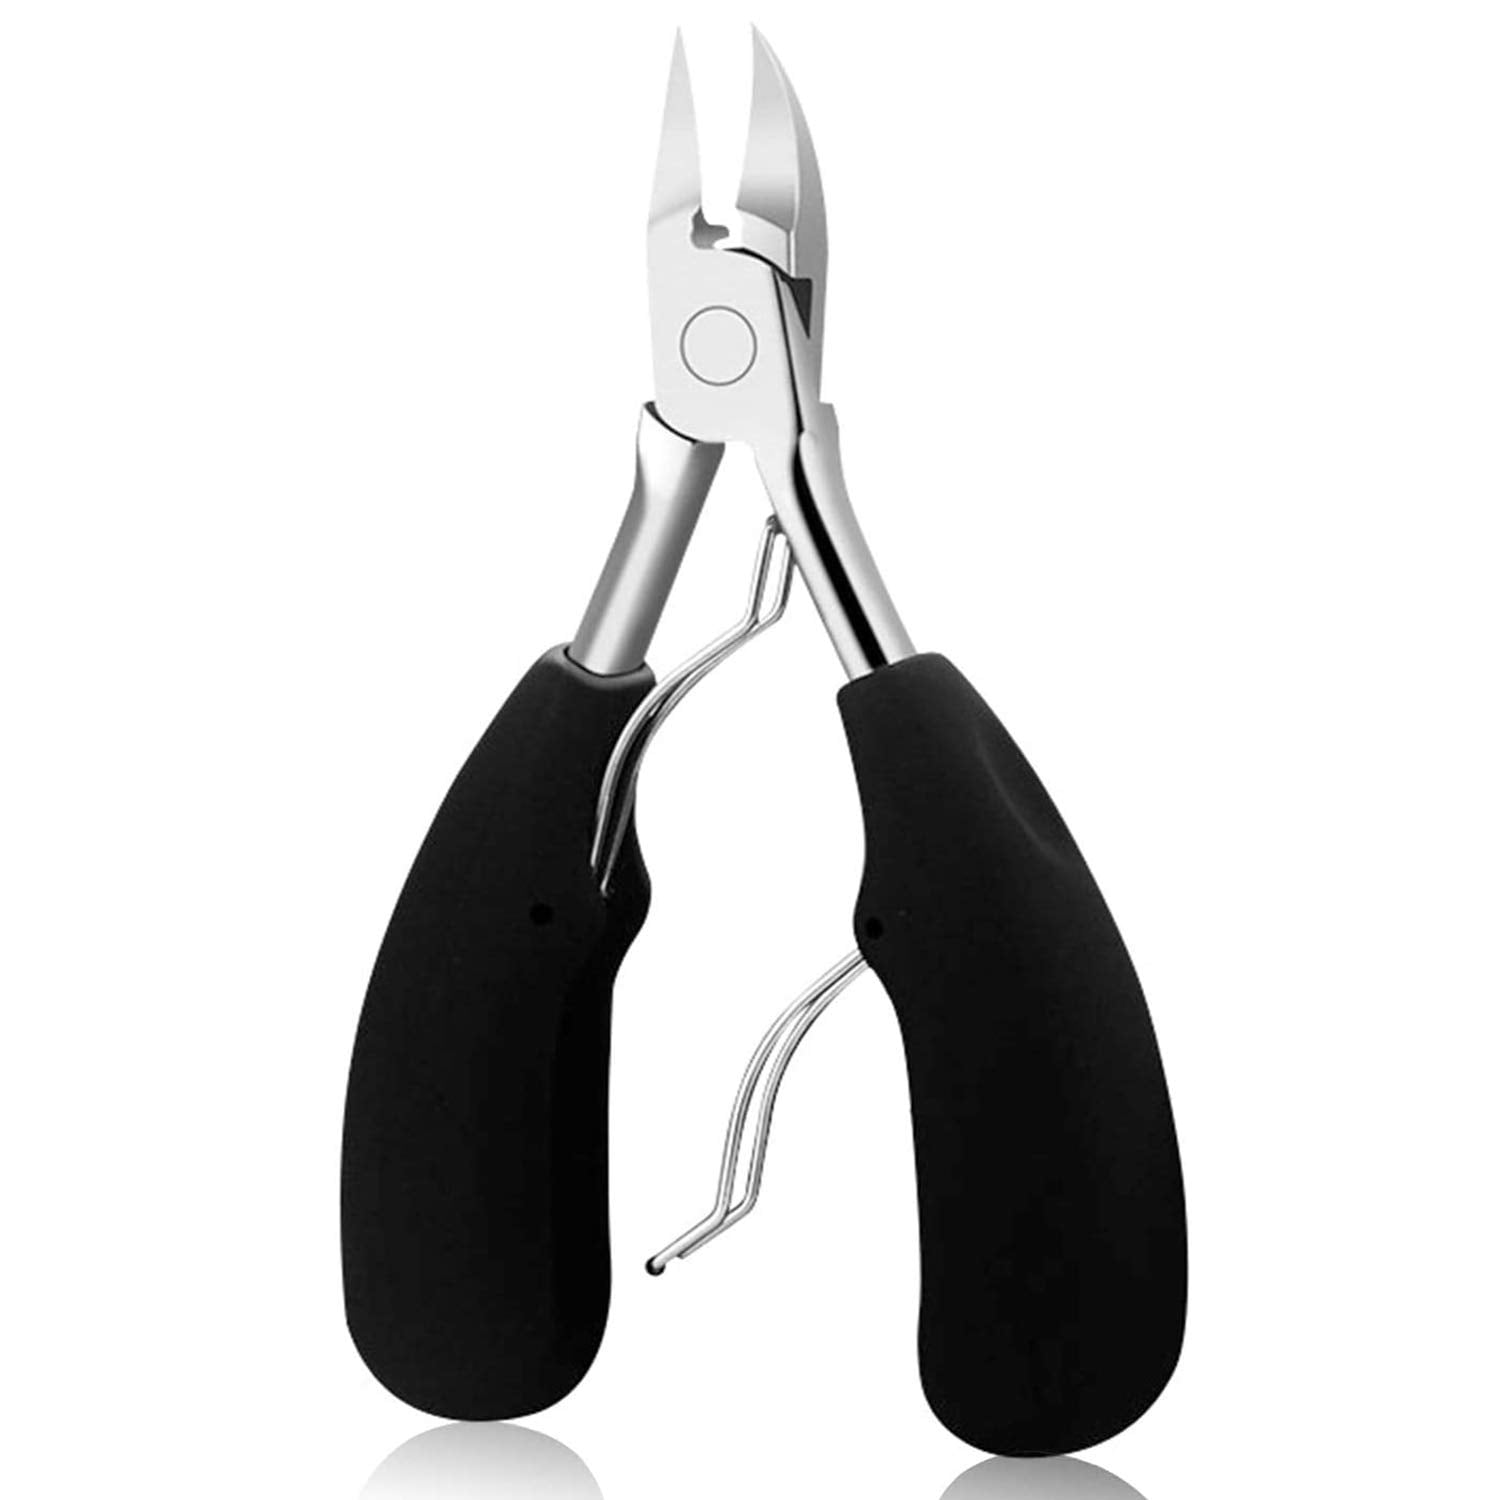 Toe Nail Clippers for Thick Nails and Ingrown Toenails, Heavy Duty